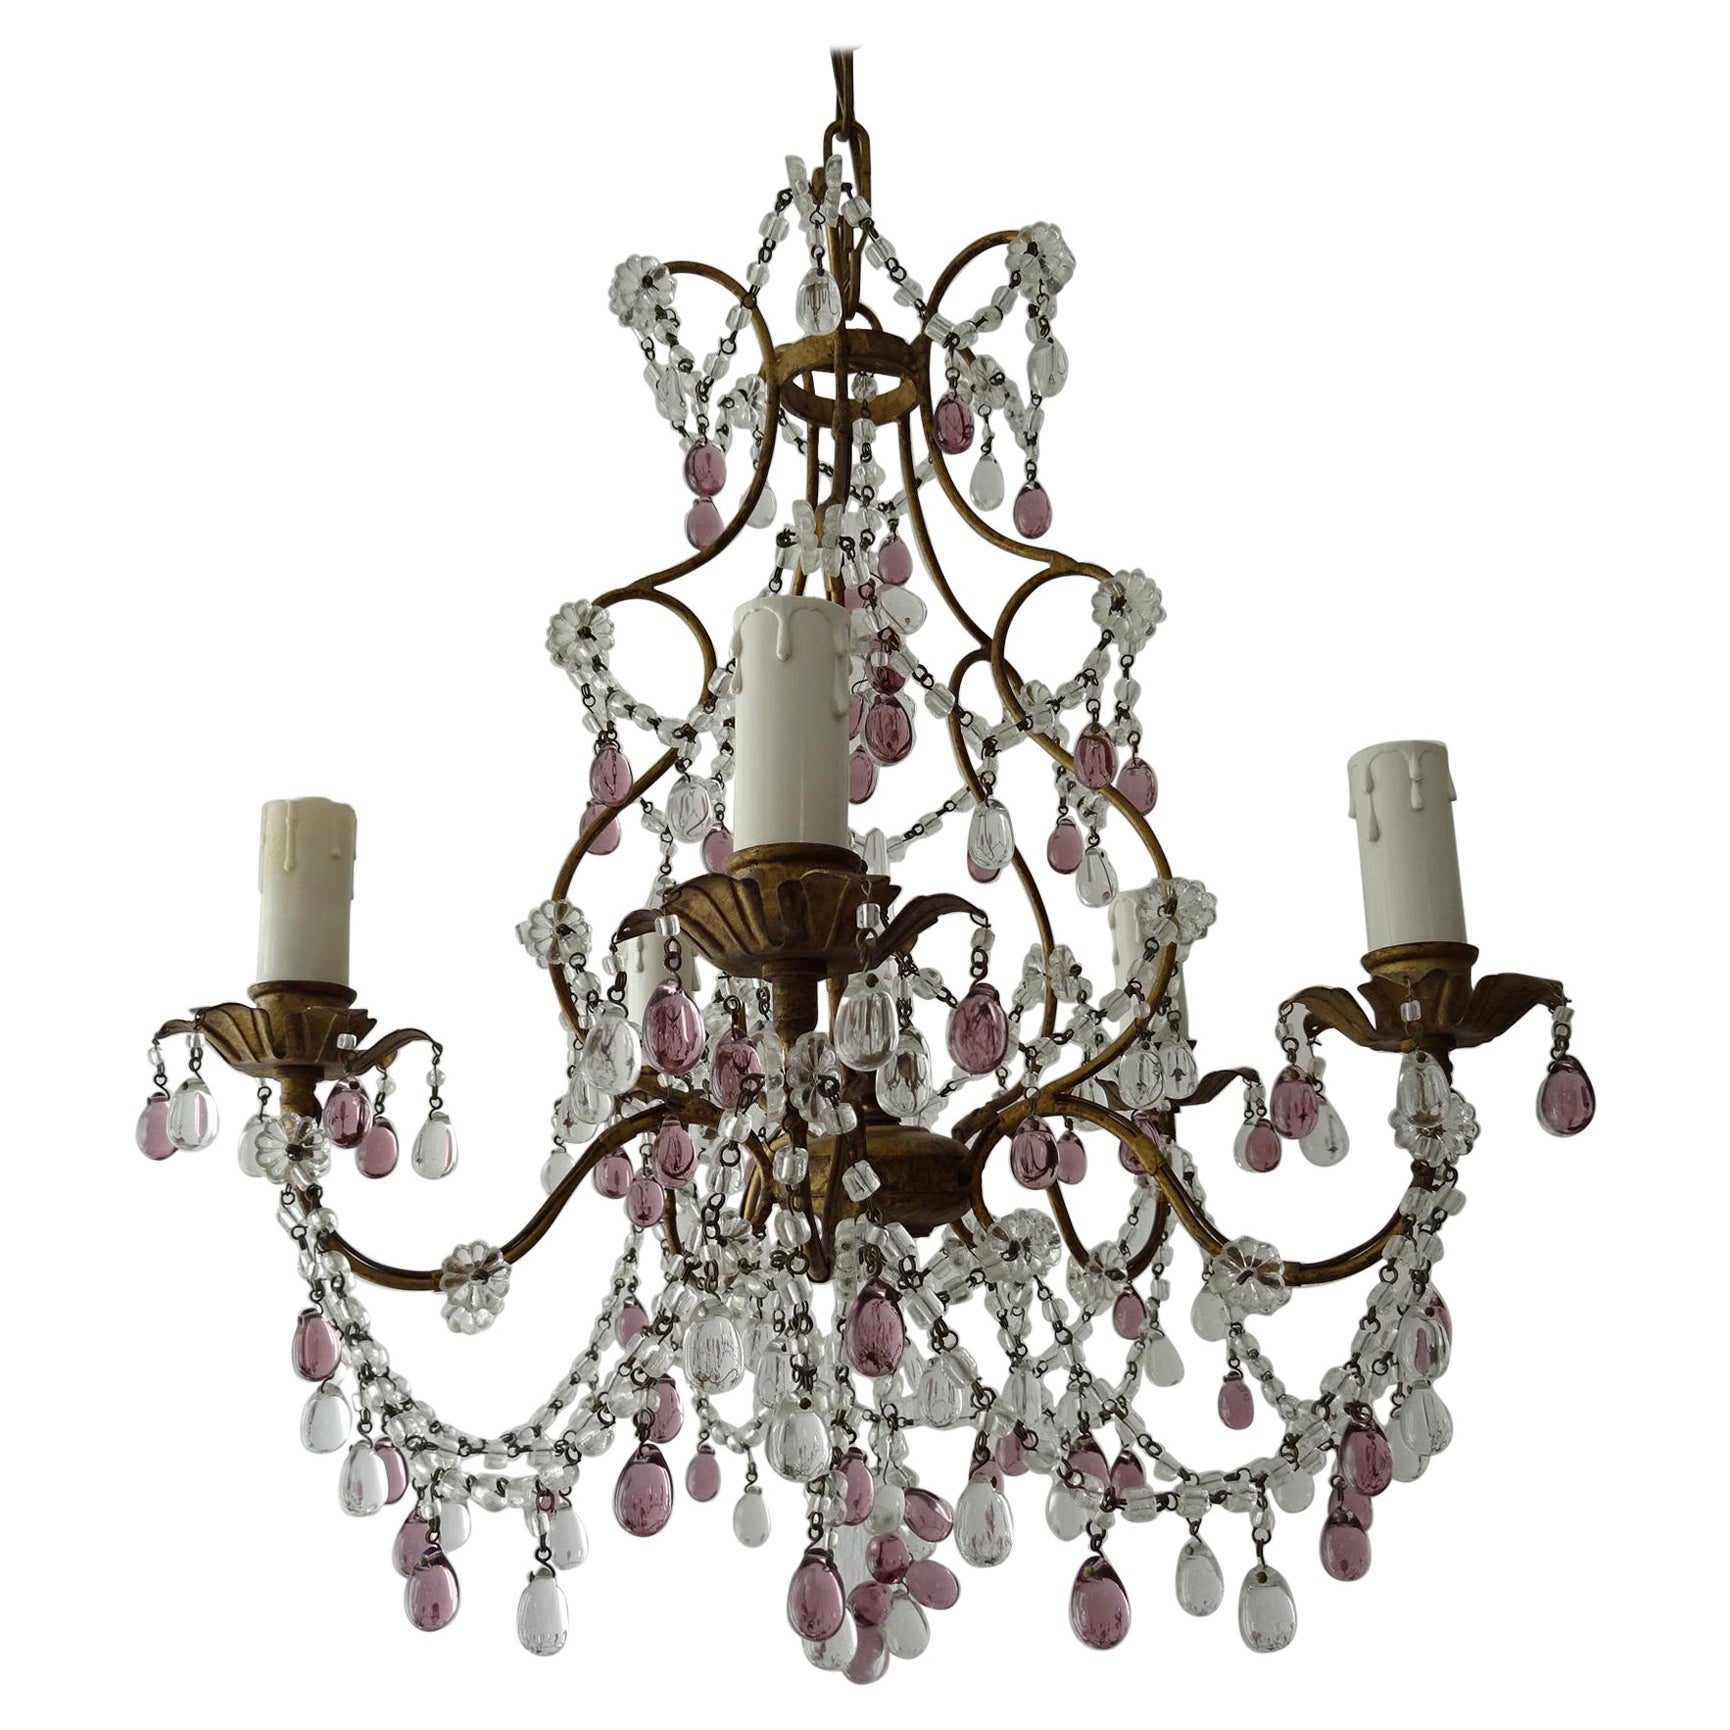 French Maison Baguès  Amethyst & Clear Murano Drops Chandelier, 1920s Signed For Sale